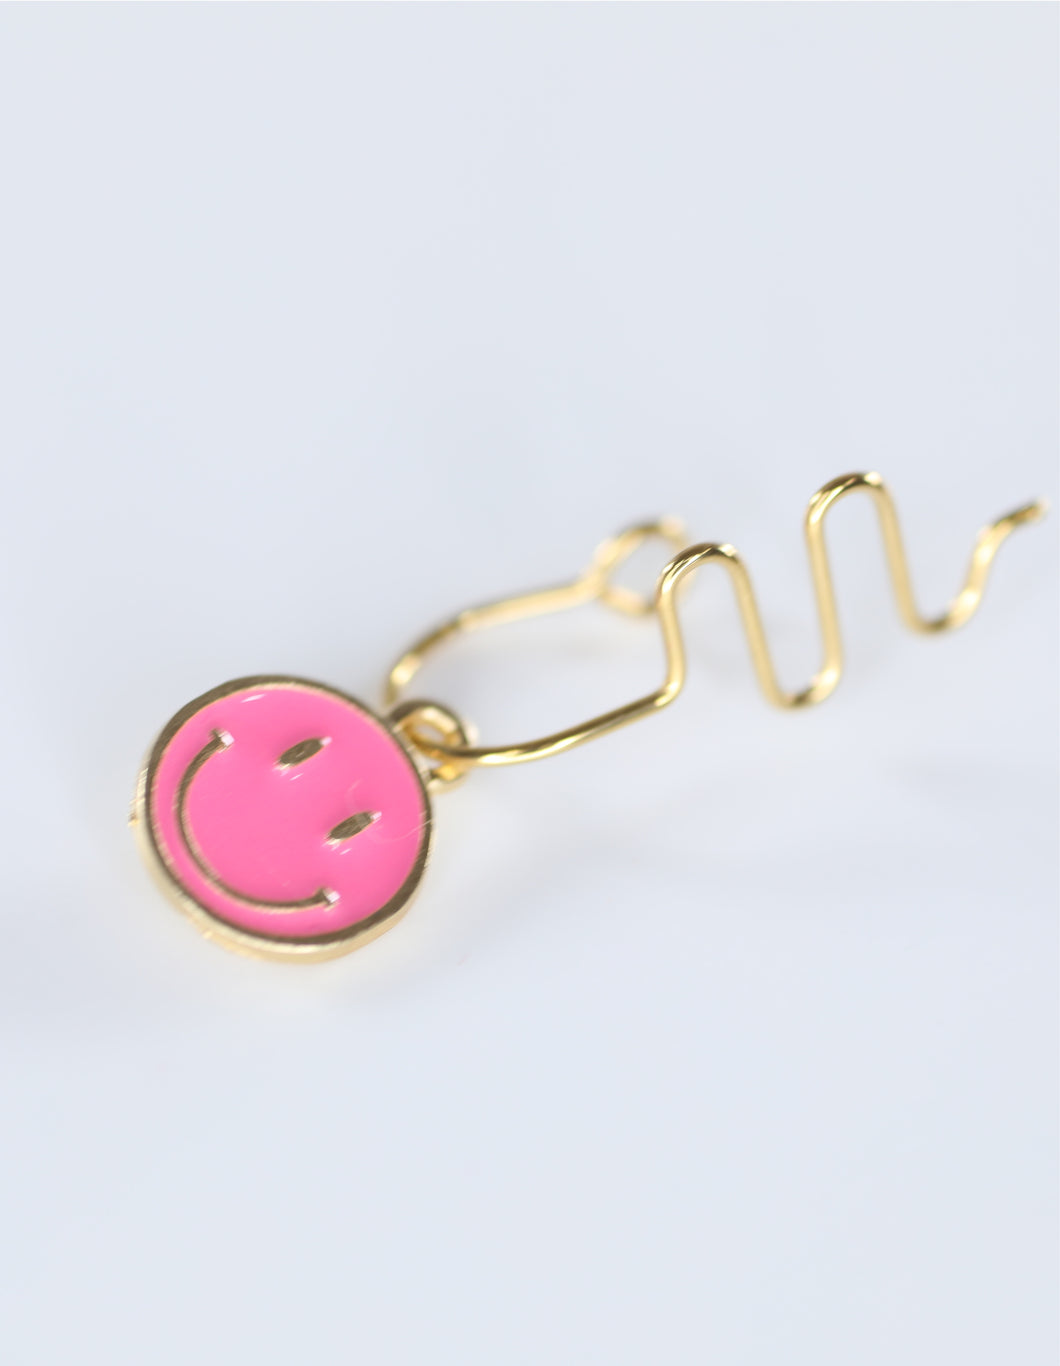 SMILEY FACE NOSE CUFF